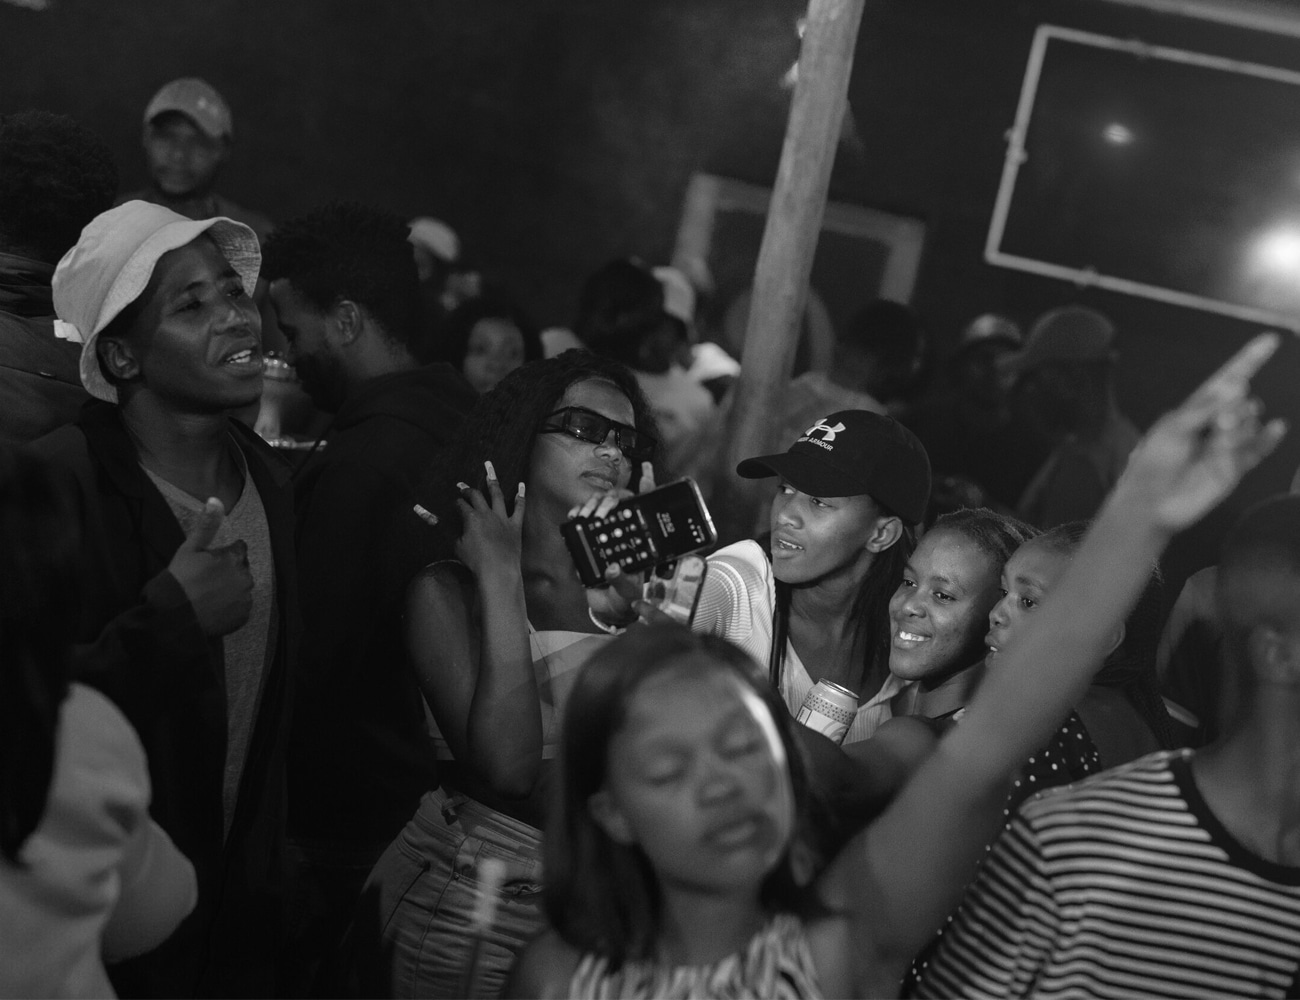 People at a Club in South Africa